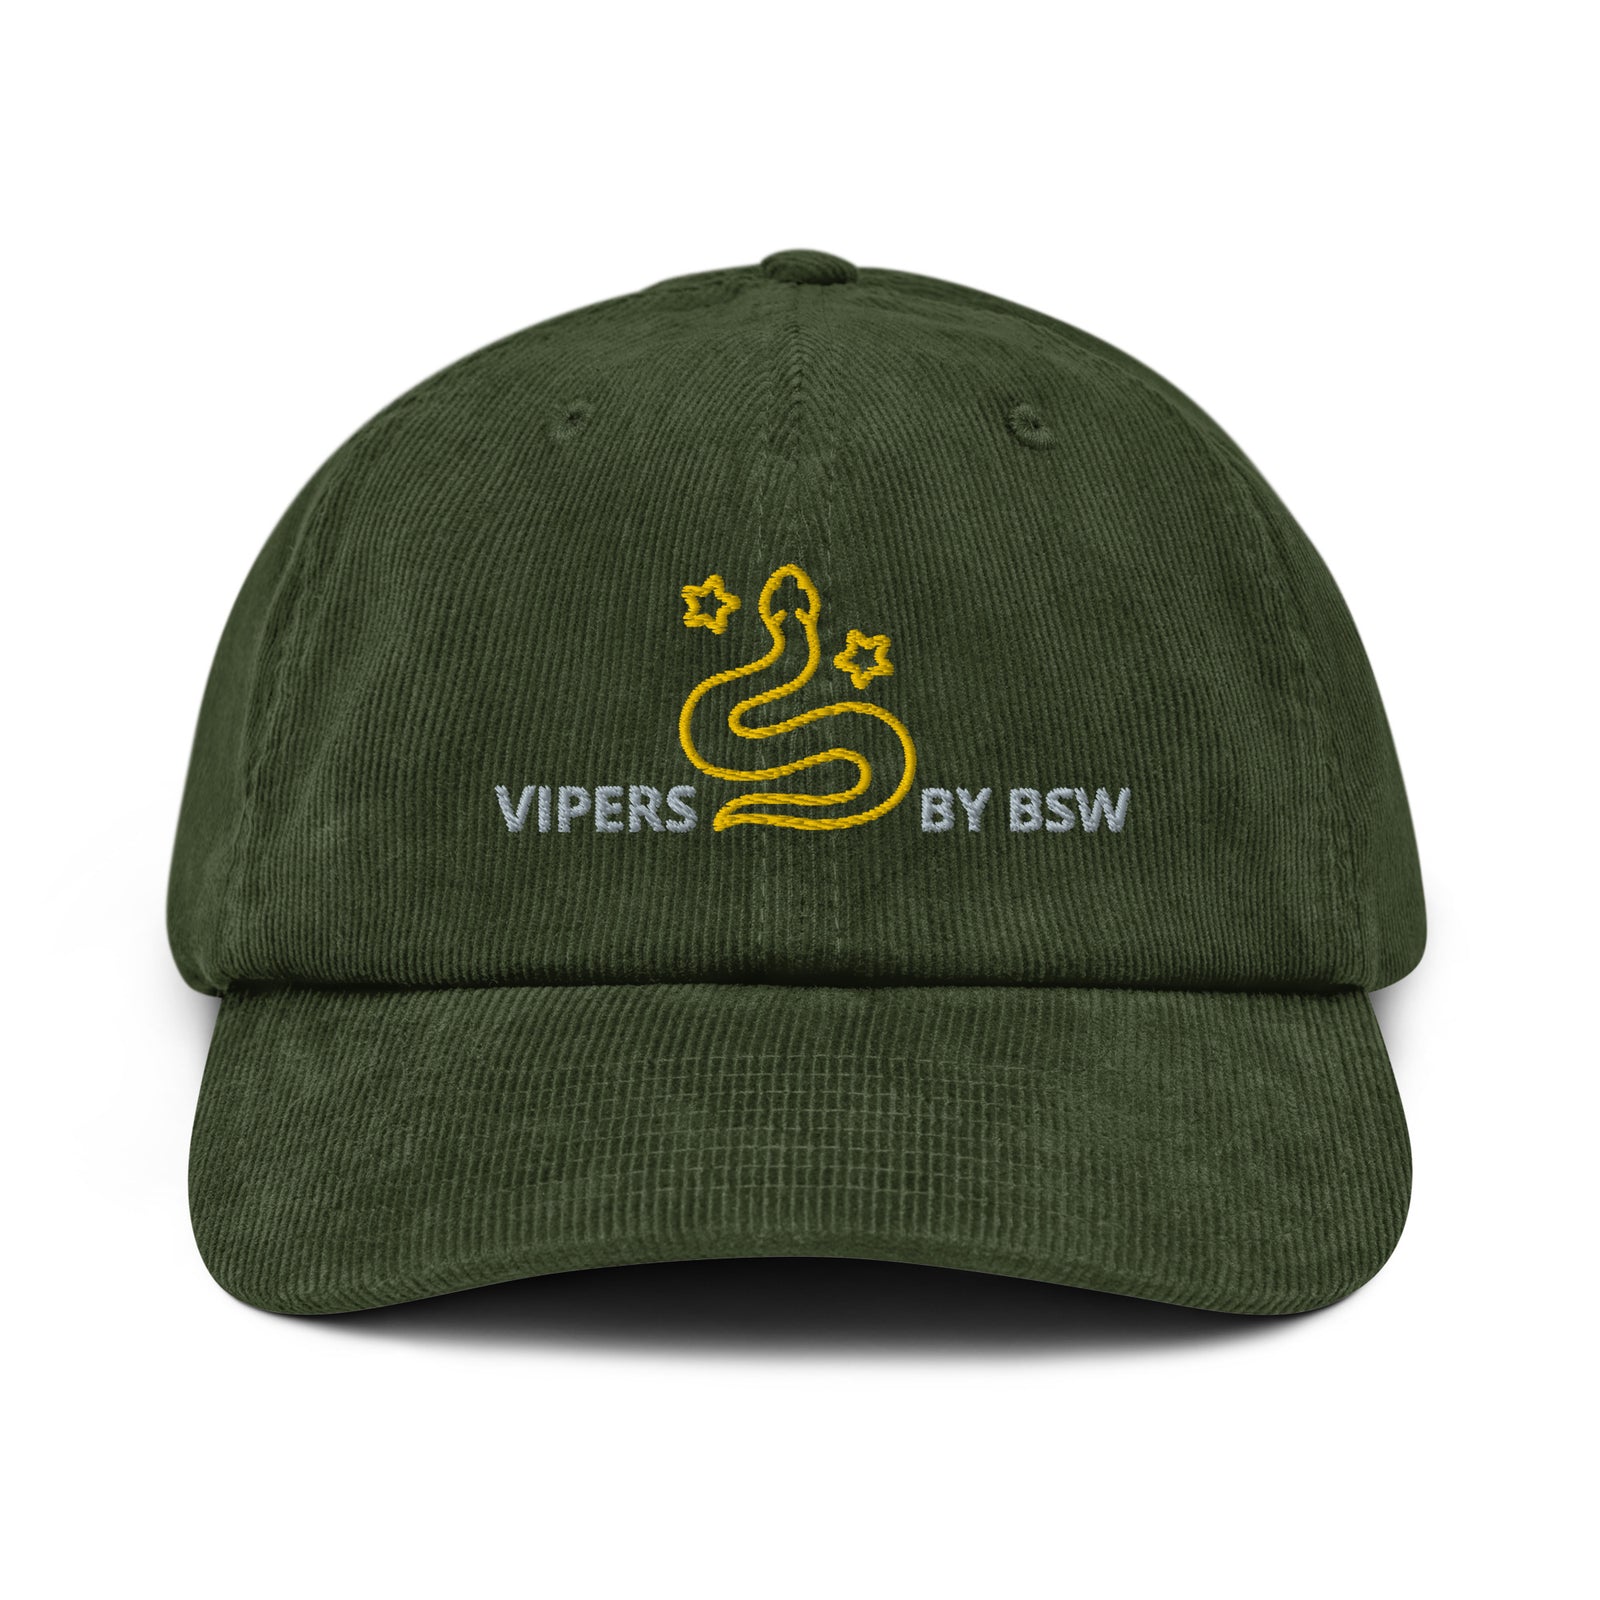 Vipers Corduroy Hat